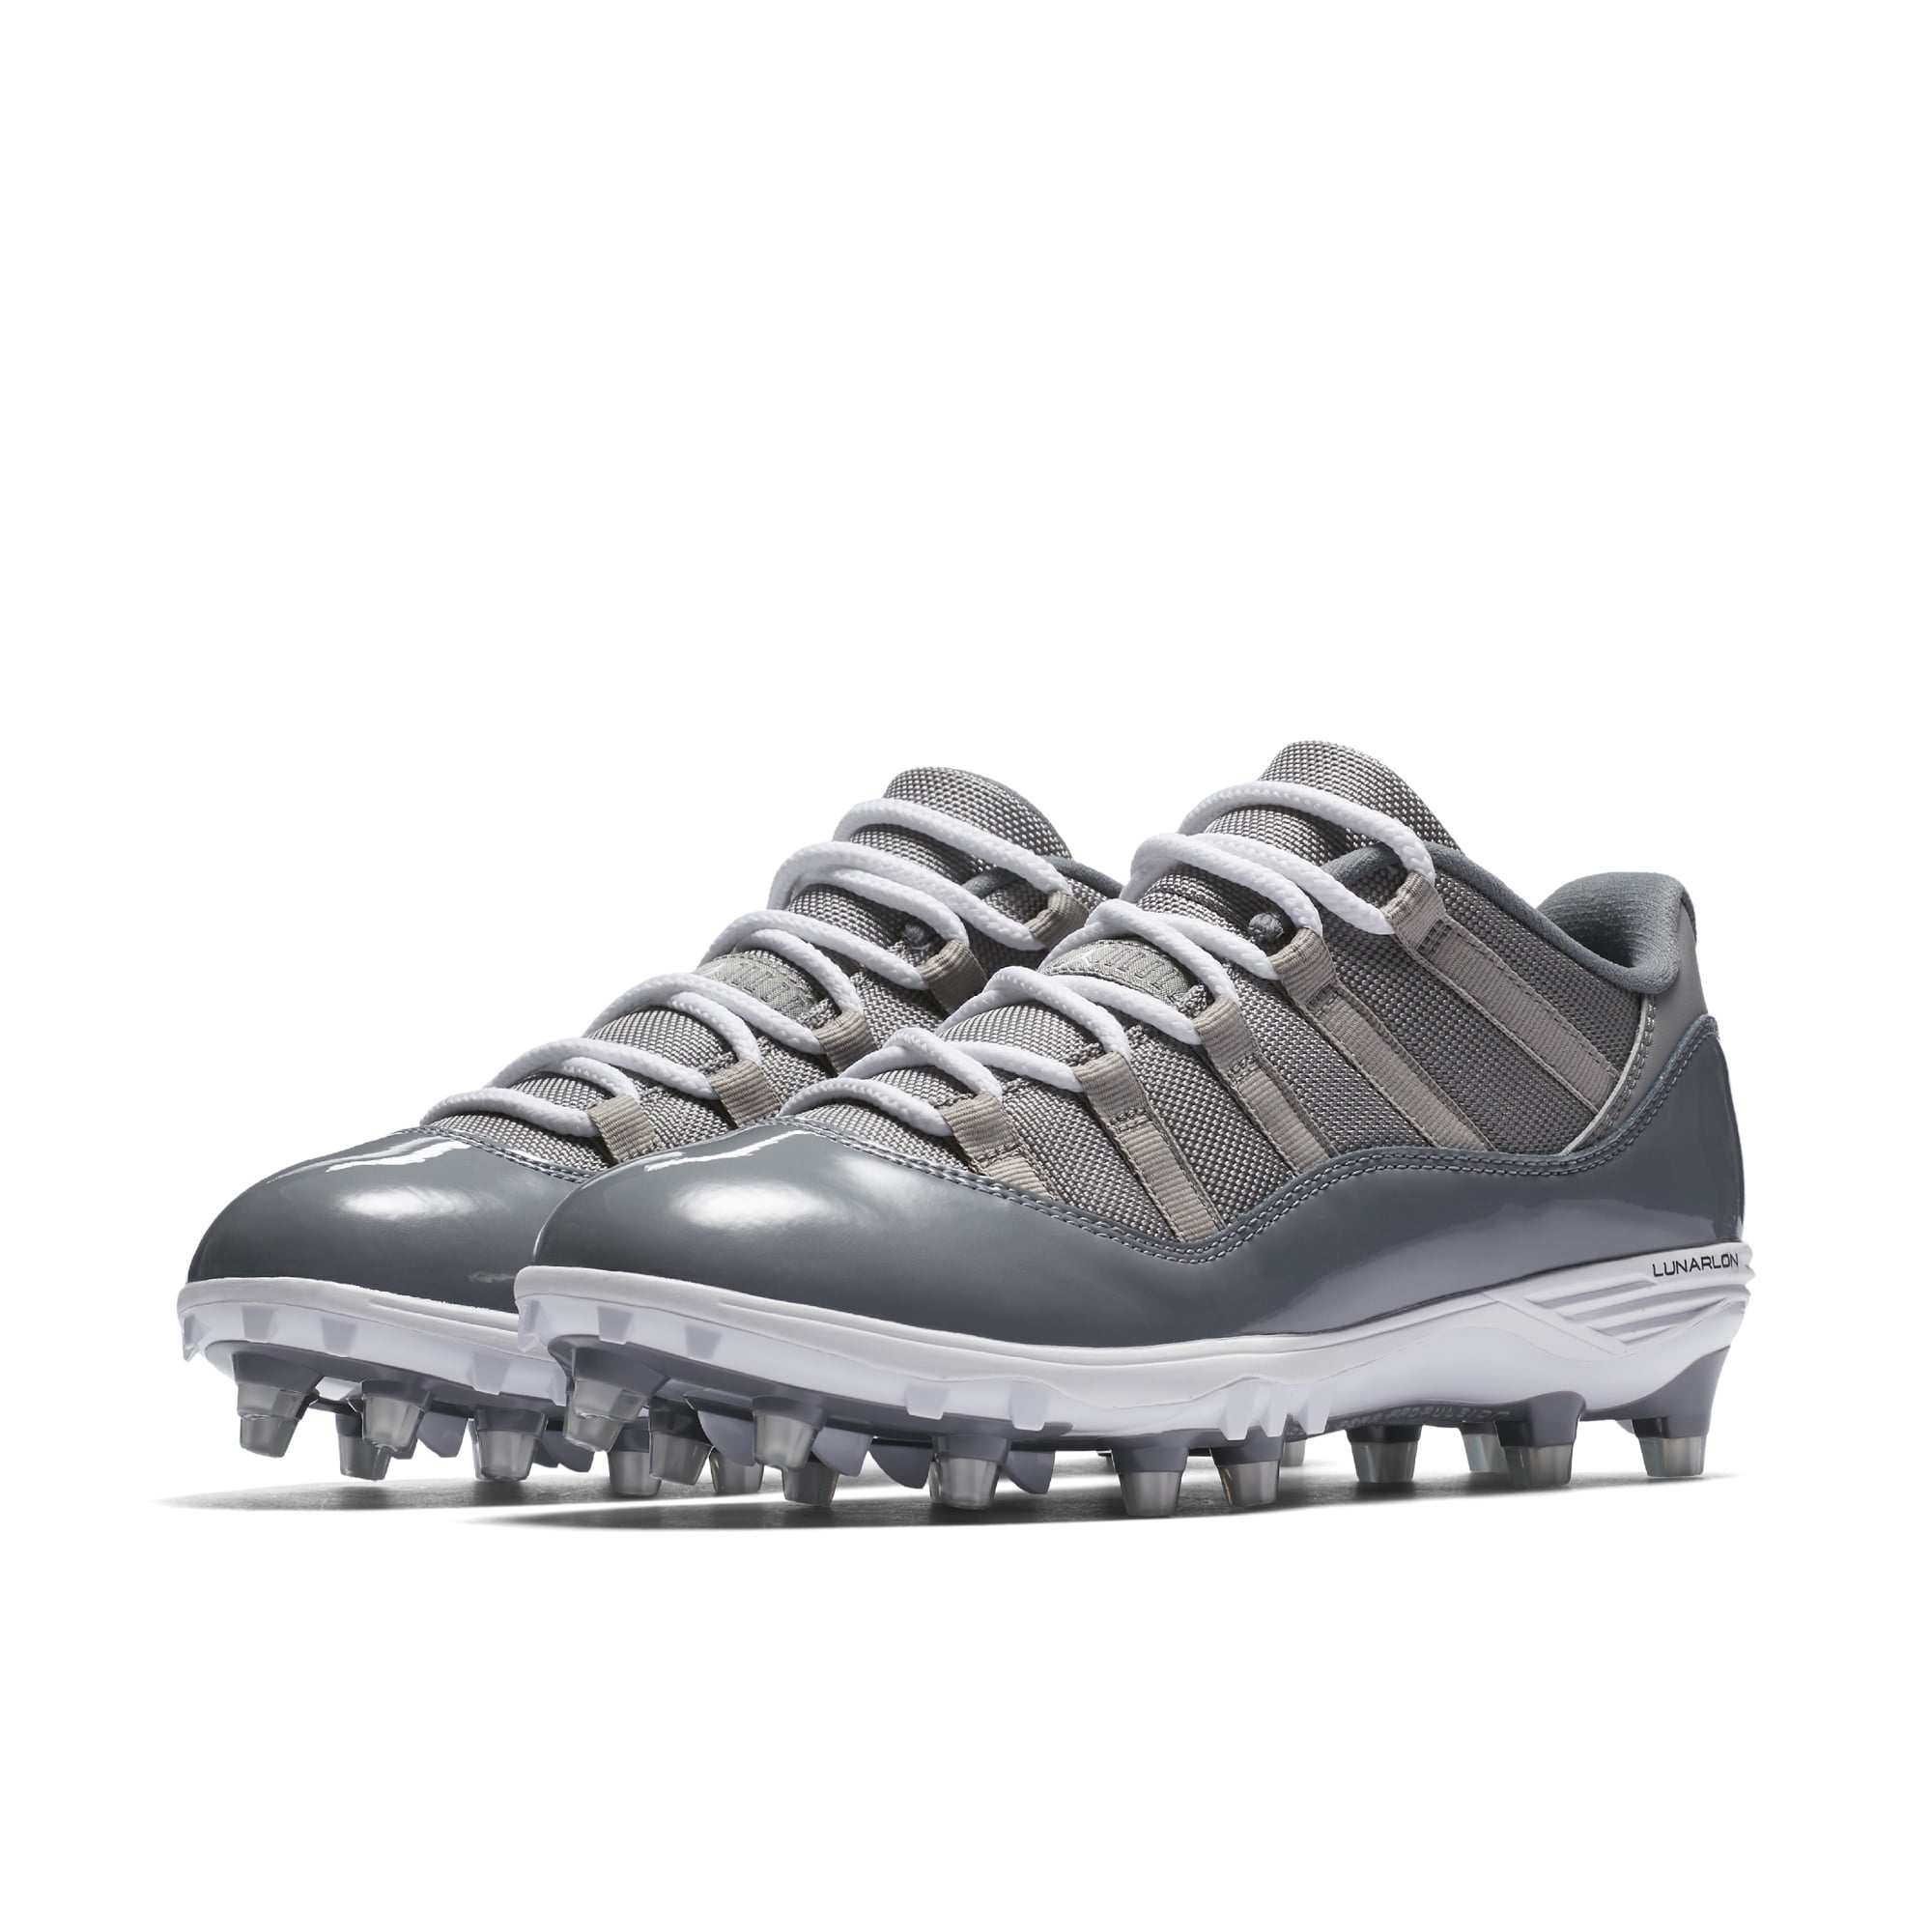 cool grey cleats